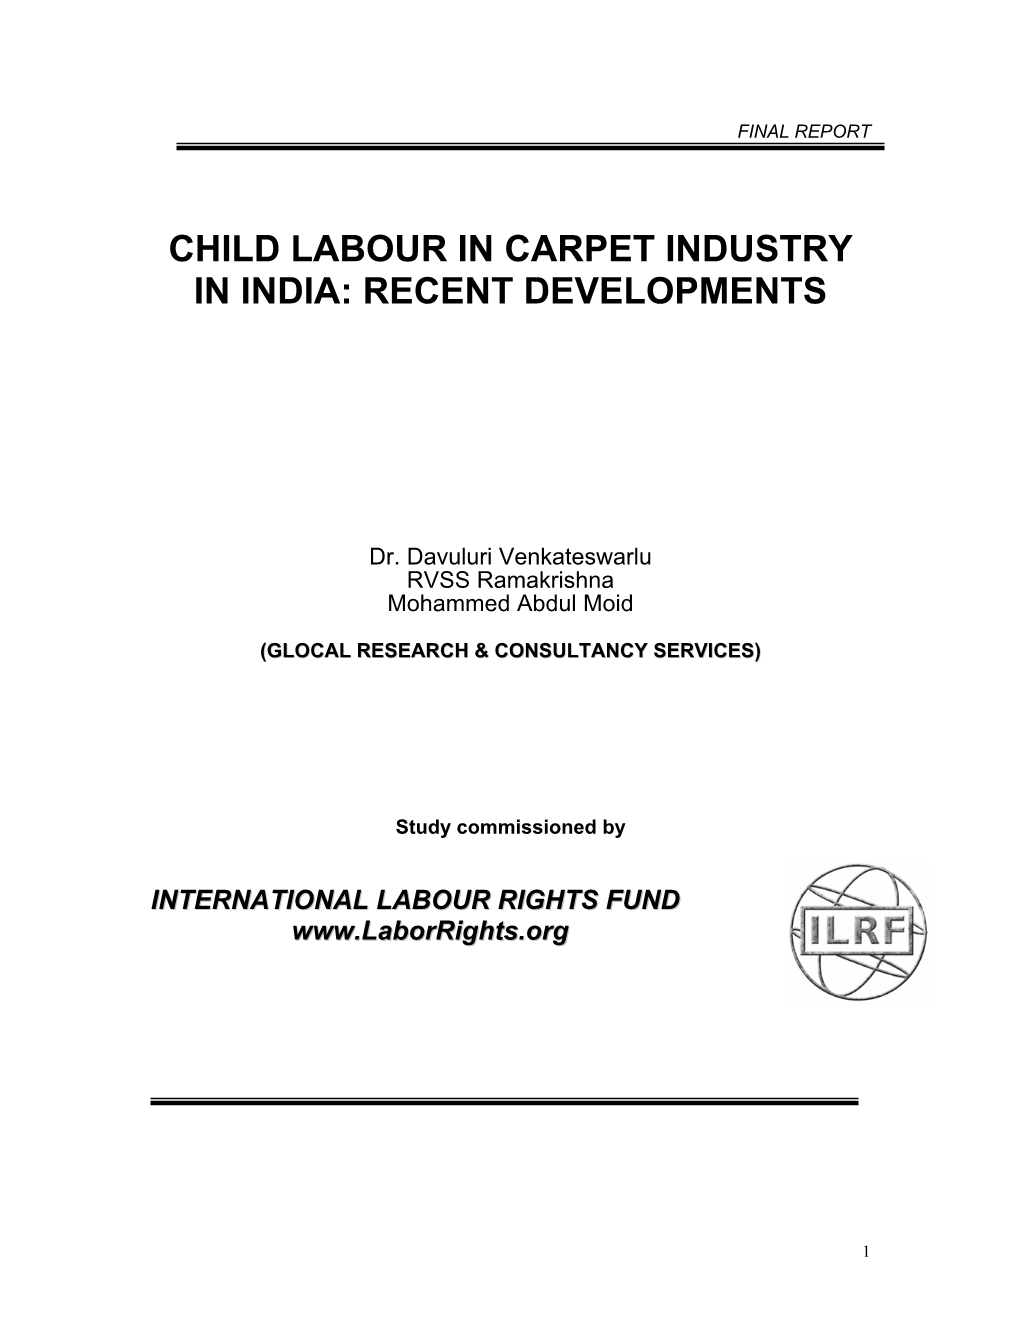 Child Labour in Carpet Industry in India: Recent Developments